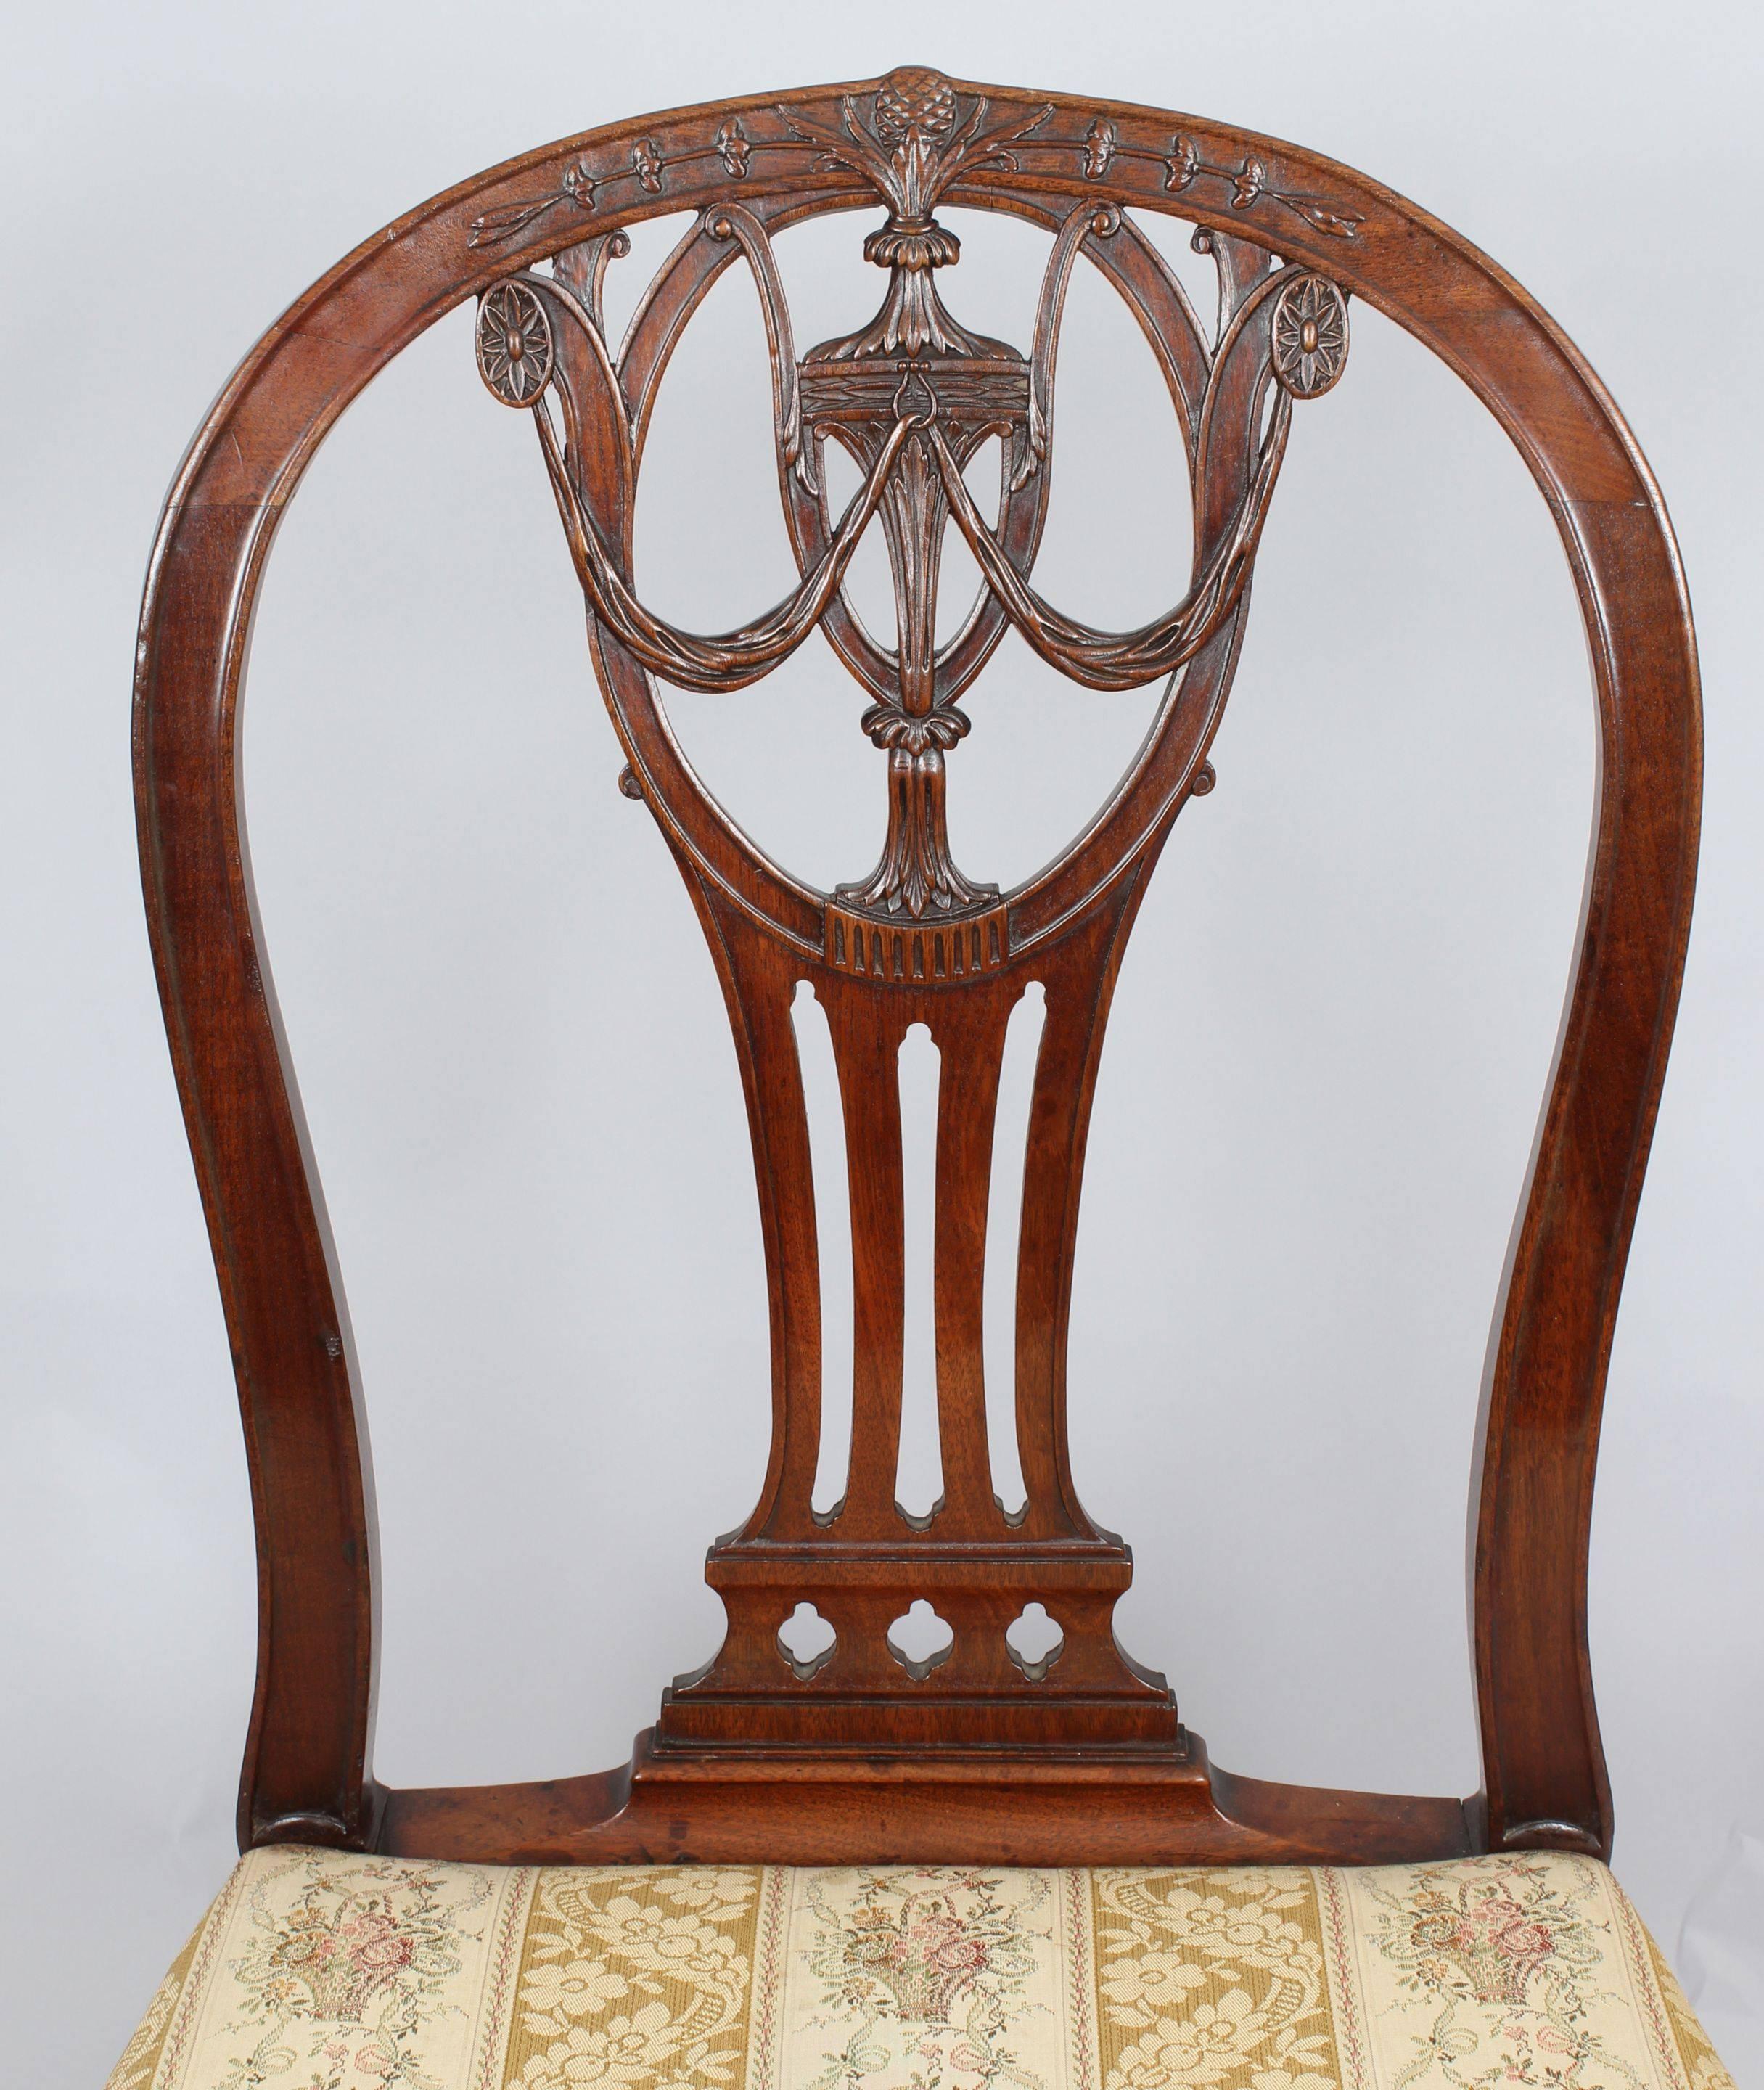 Pair of George III period mahogany side-chairs in the Hepplewhite manner with channelled arched backs and finely-carved openwork splats decorated with a central urn, drapery, oval paterae, floral trails and a pine-cone cresting. The bowed seats with